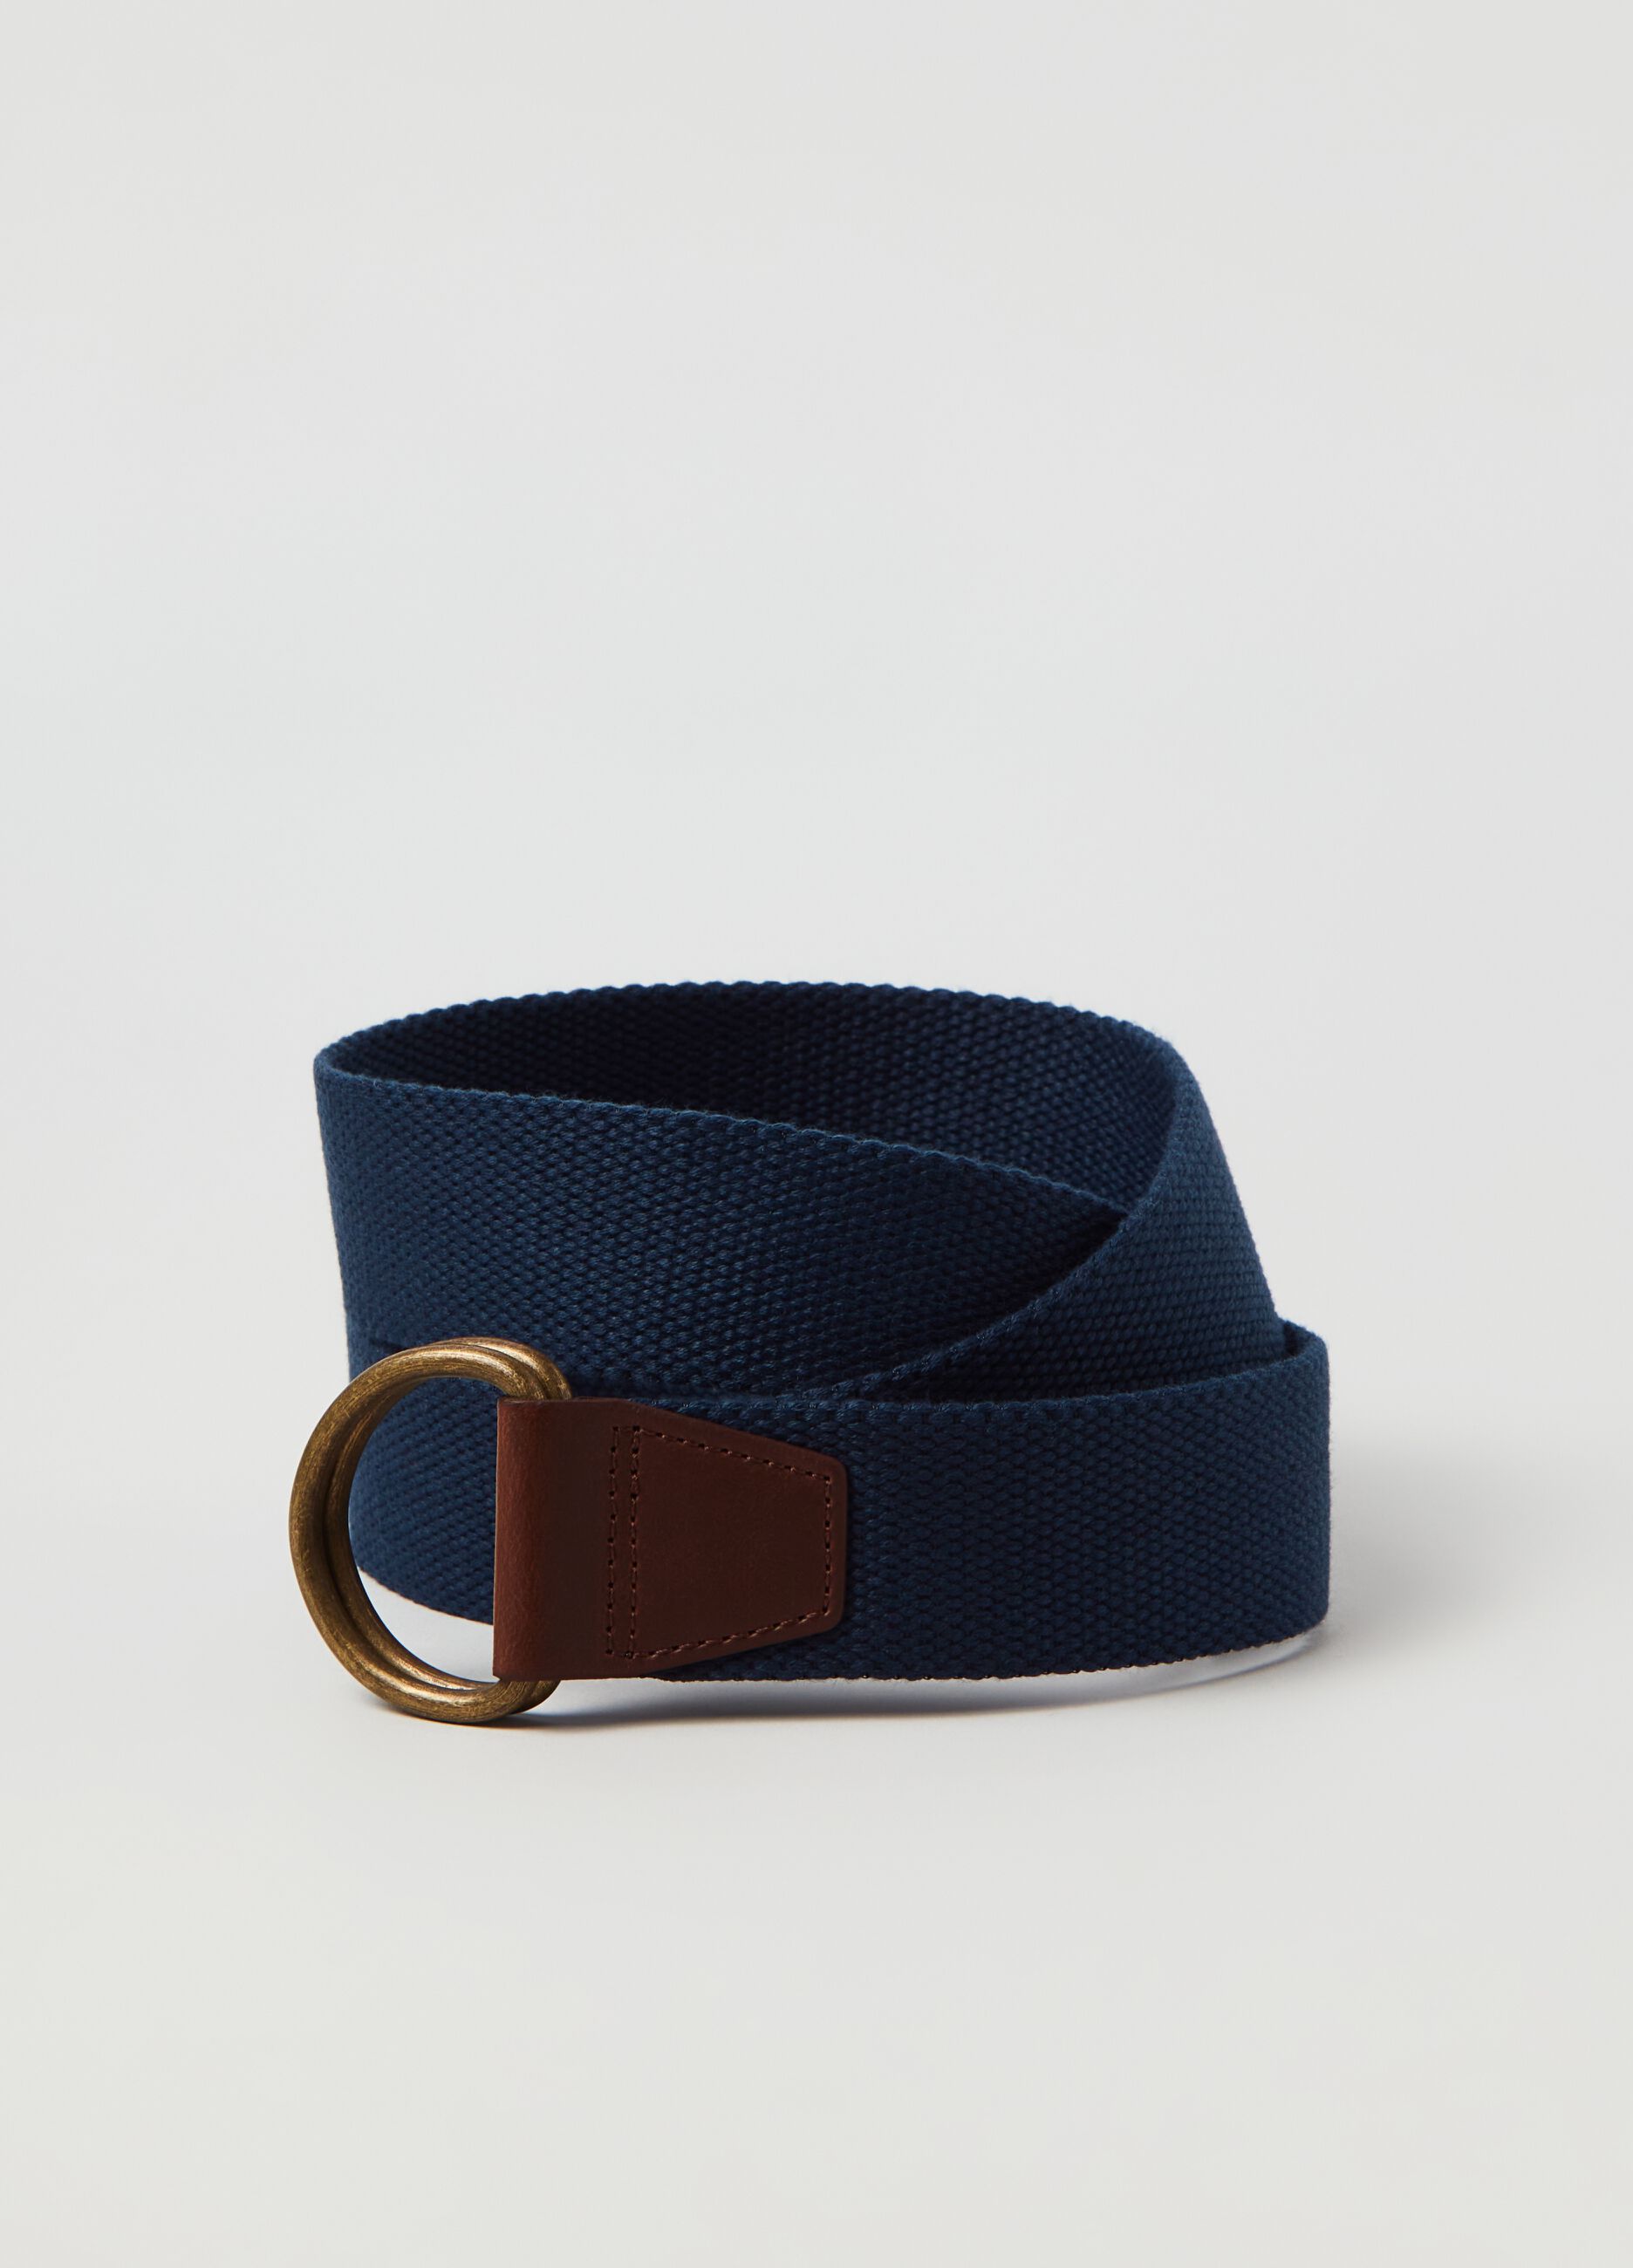 Canvas belt with ring buckle.